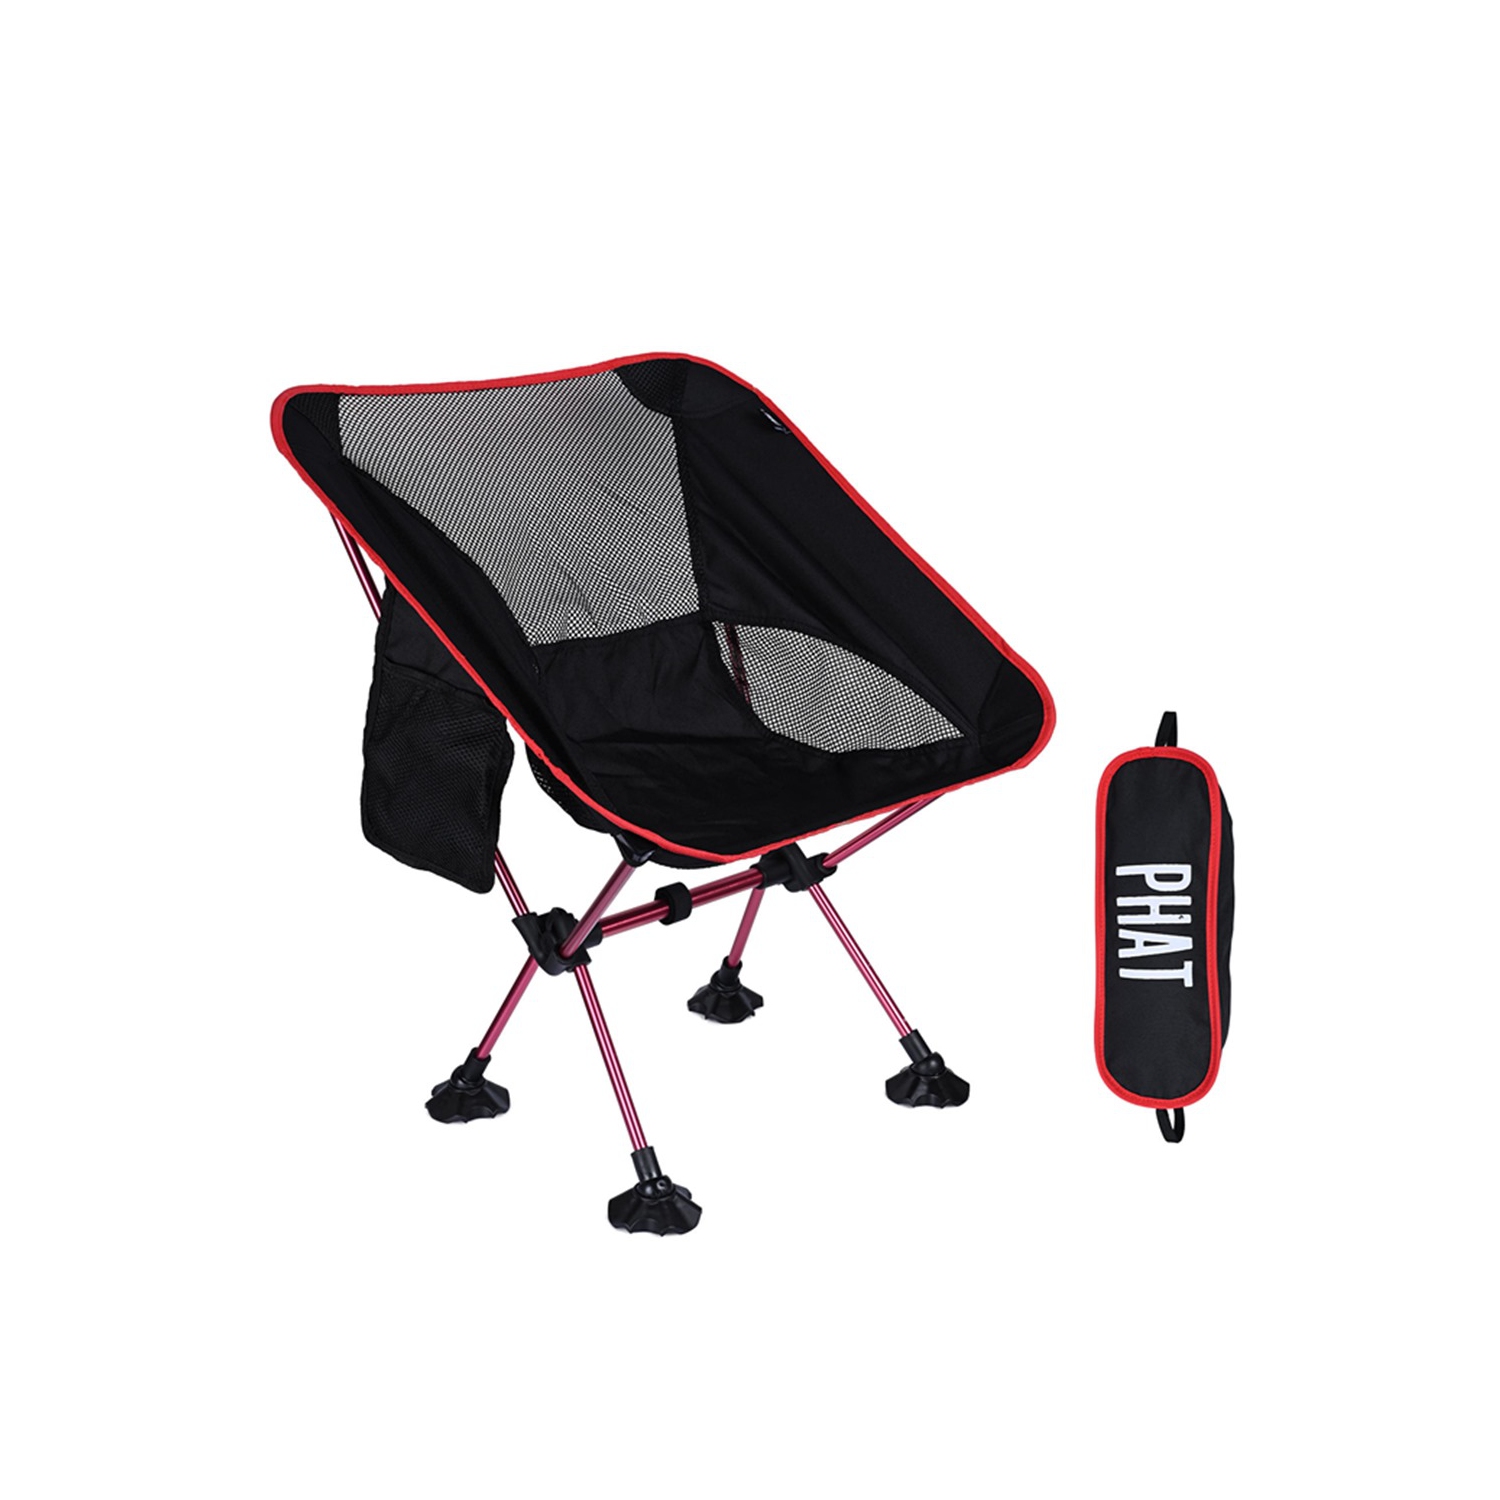 Lightweight Portable Compact Camping Moon Chair, fit to 265 lbs